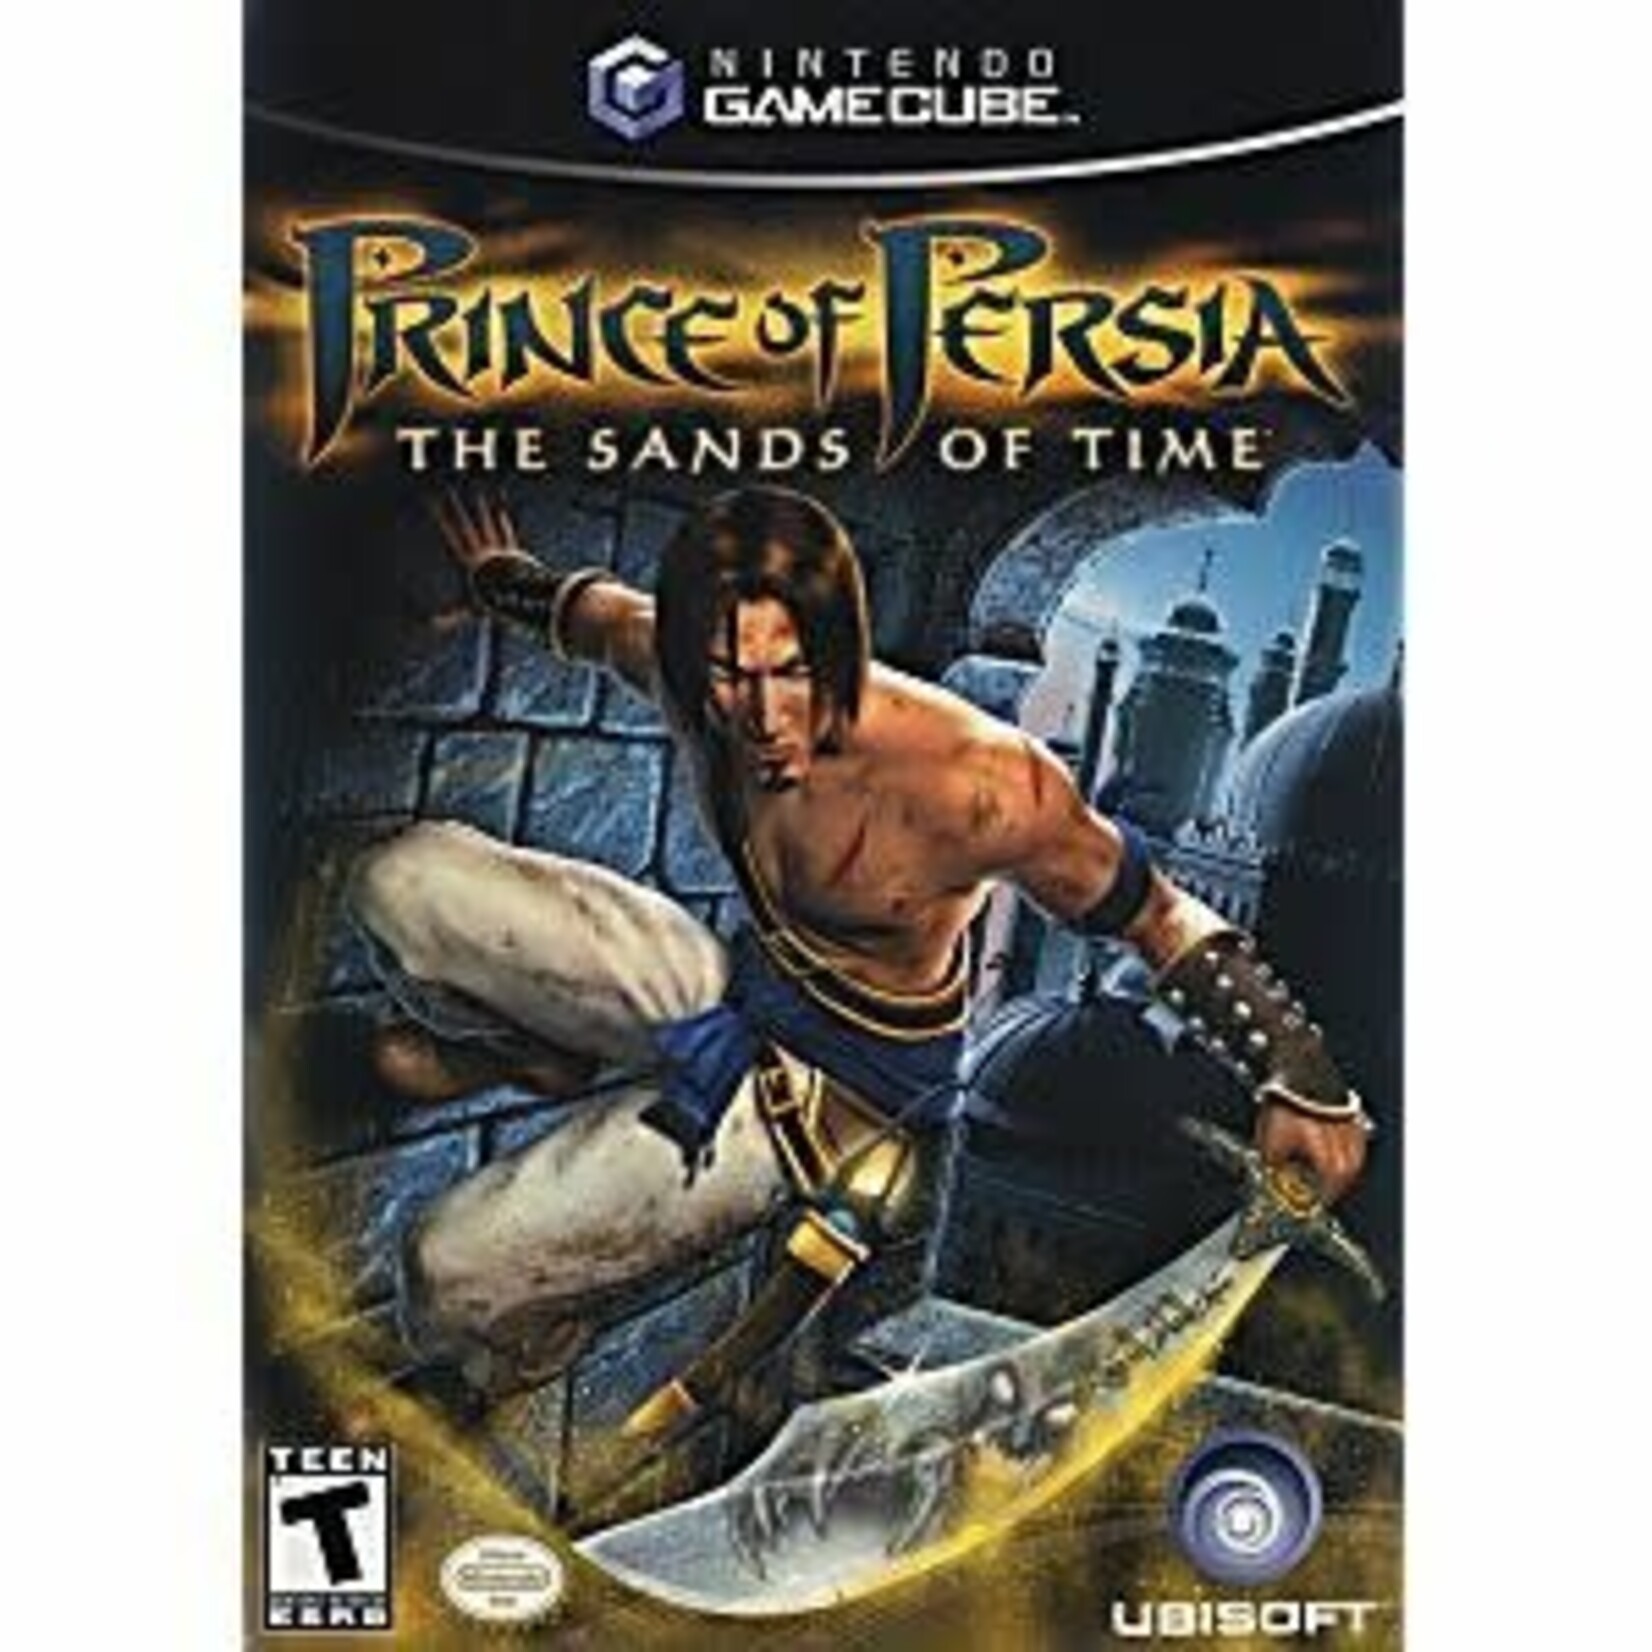 GCU-PRINCE OF PERSIA SANDS OF TIME